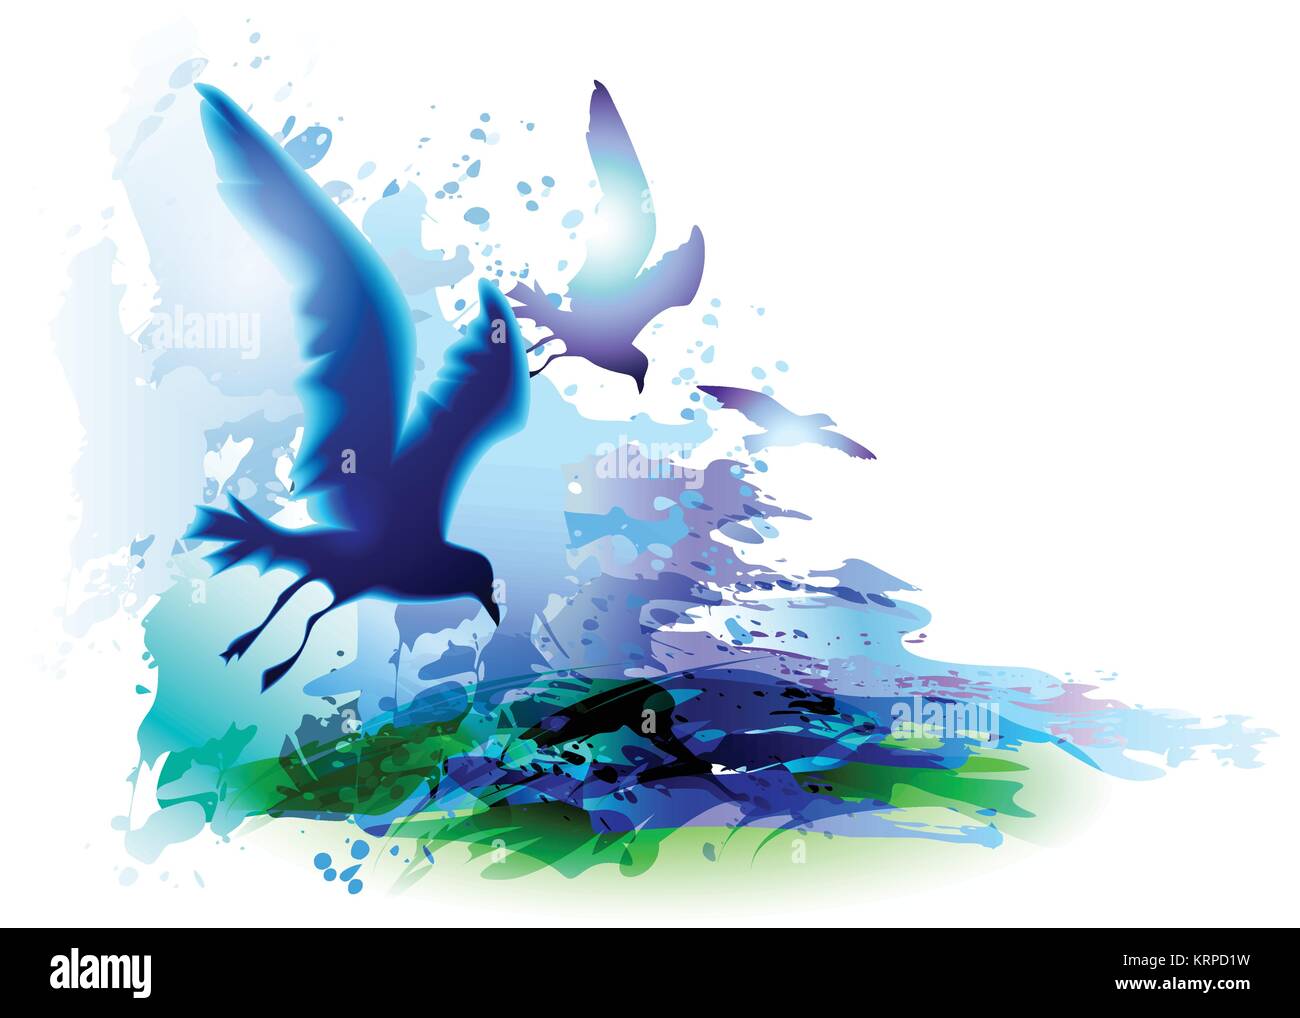 Birds flying and ocean waves. Seascape. Vector illustration. Blue water. Digital watercolor painting. Stock Vector